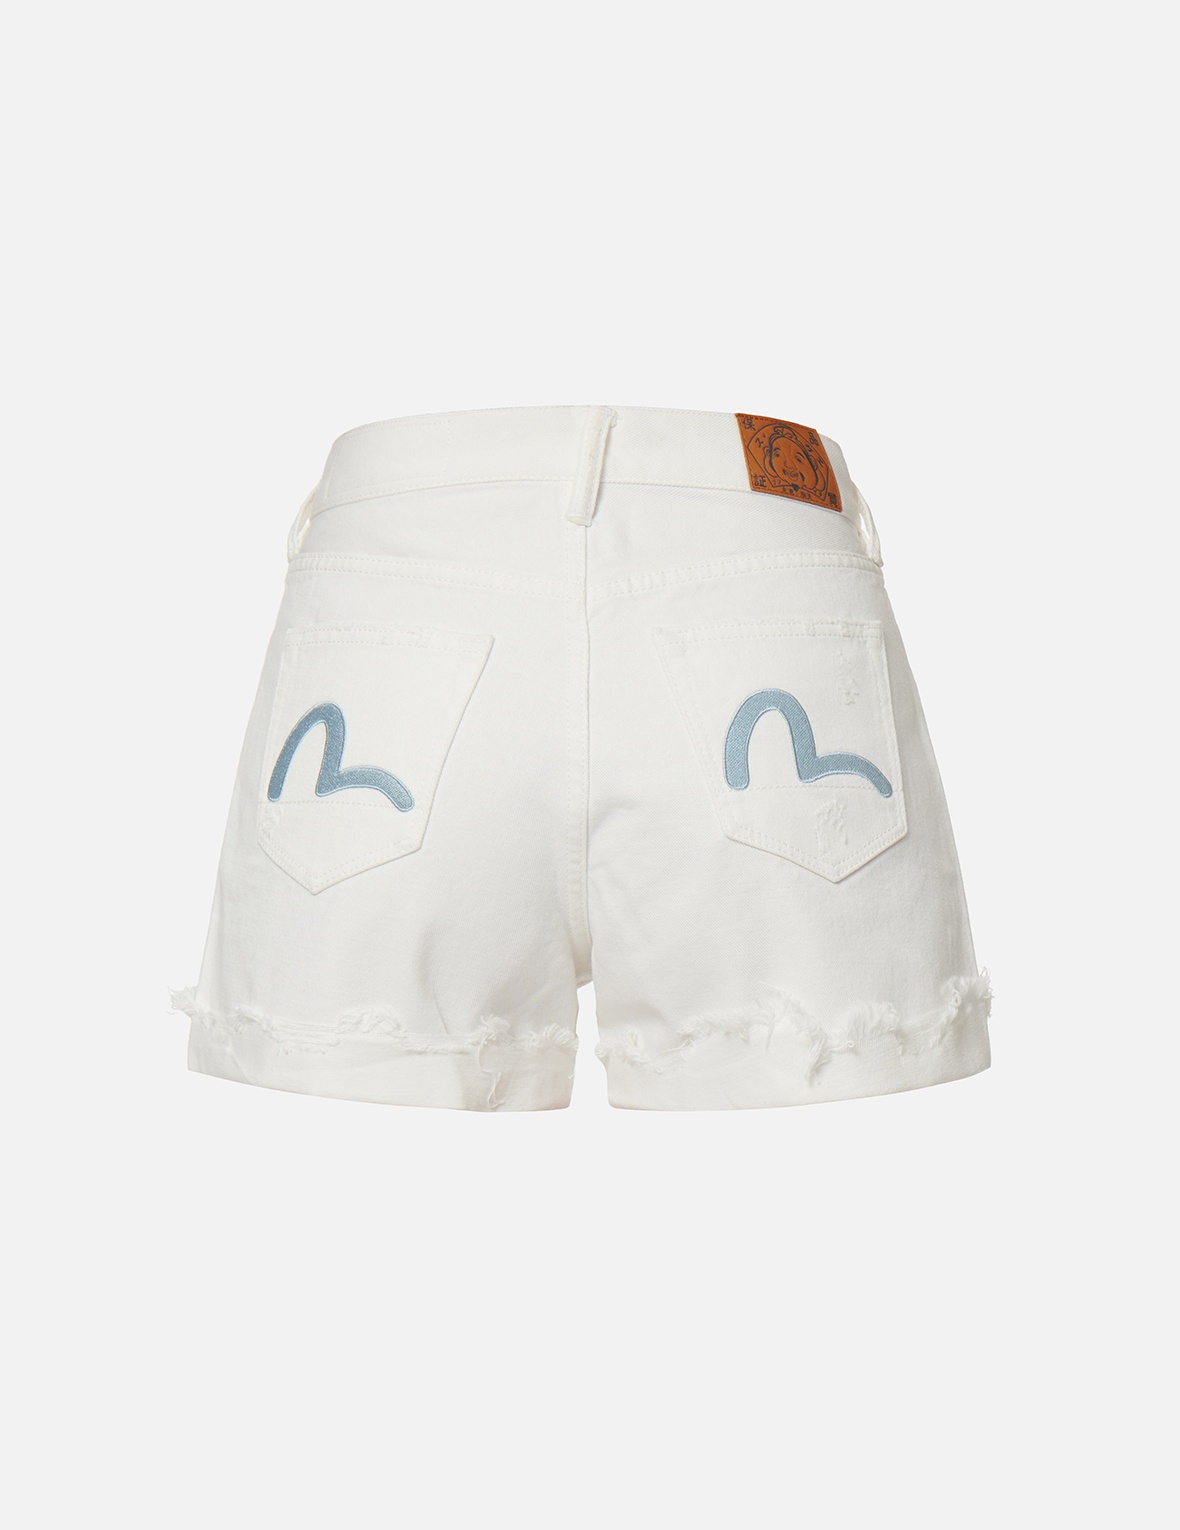 SEAGULL EMBROIDERY DENIM SHORTS - 1